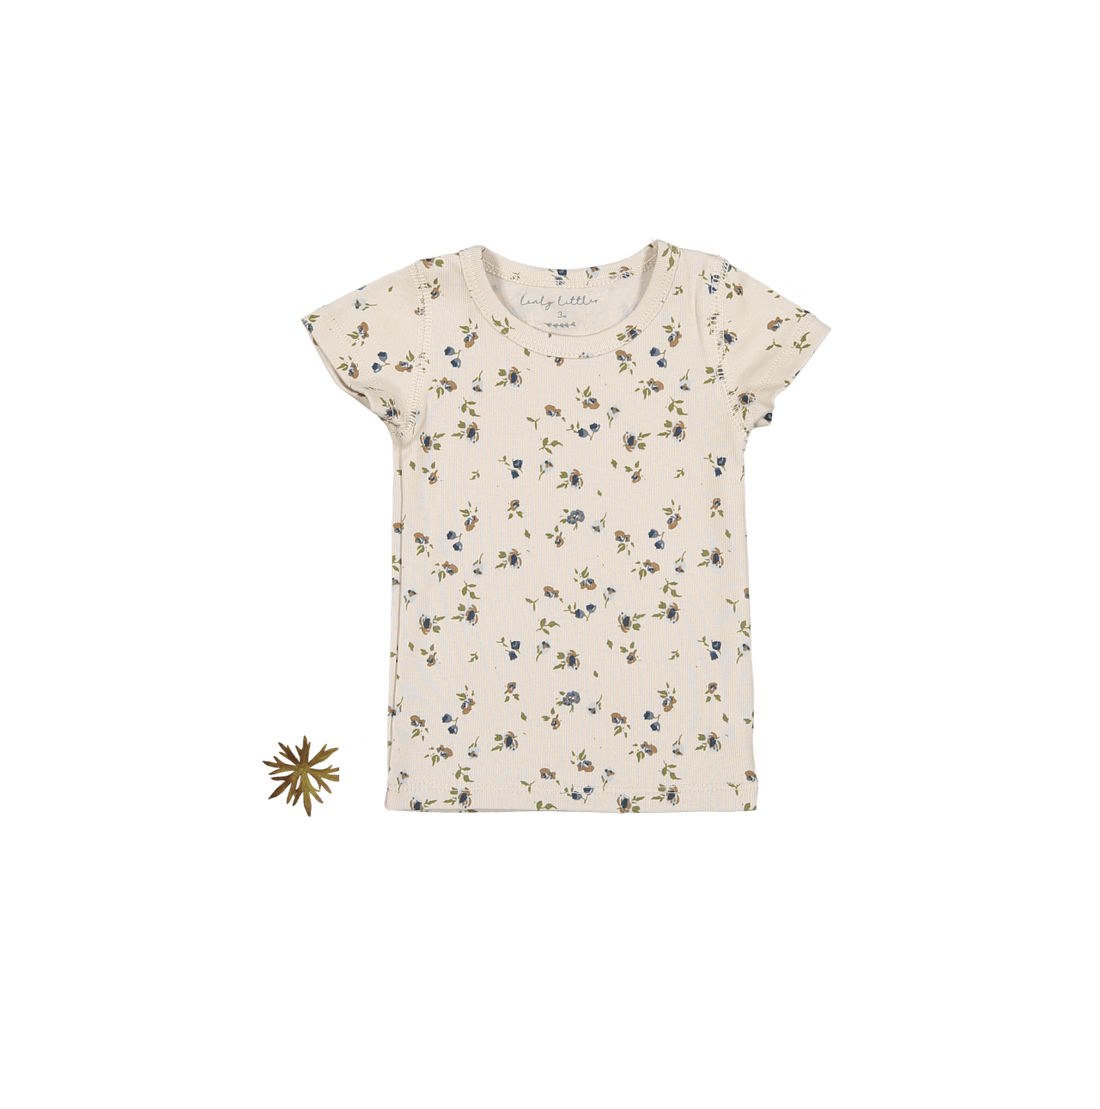 The Printed Short Sleeve Tee - Floral Sand